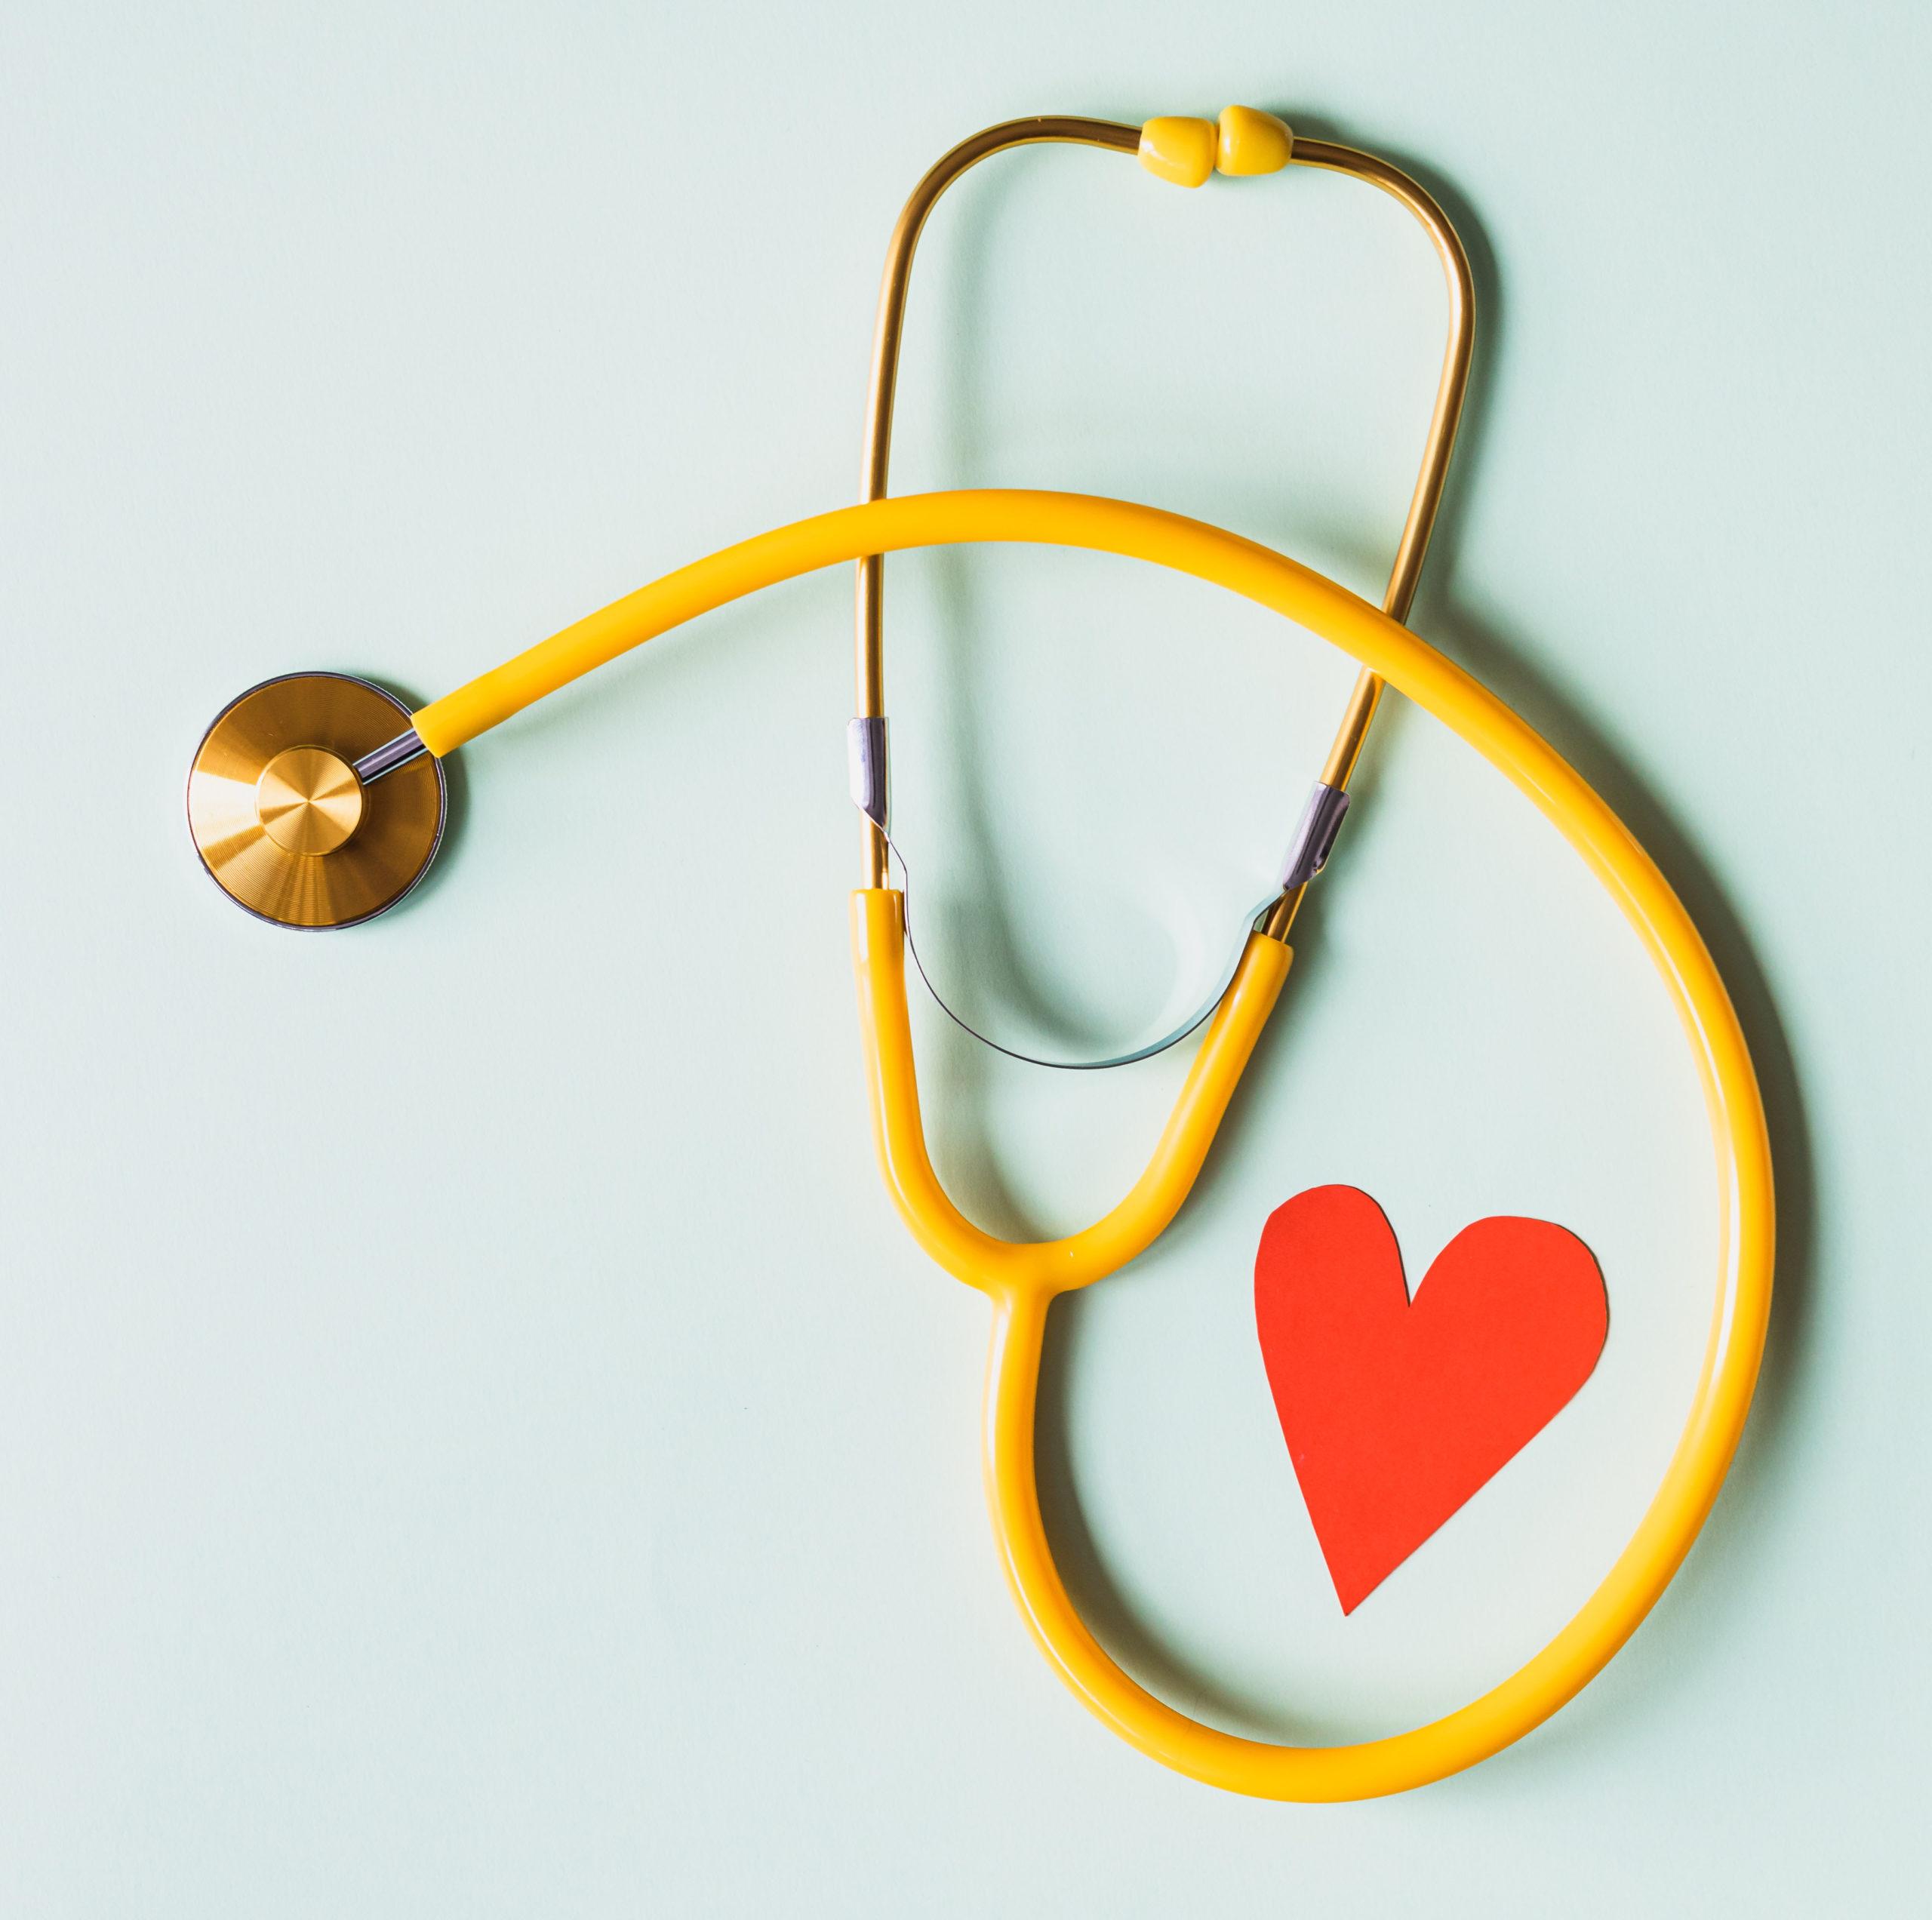 Stethoscope with heart cutout